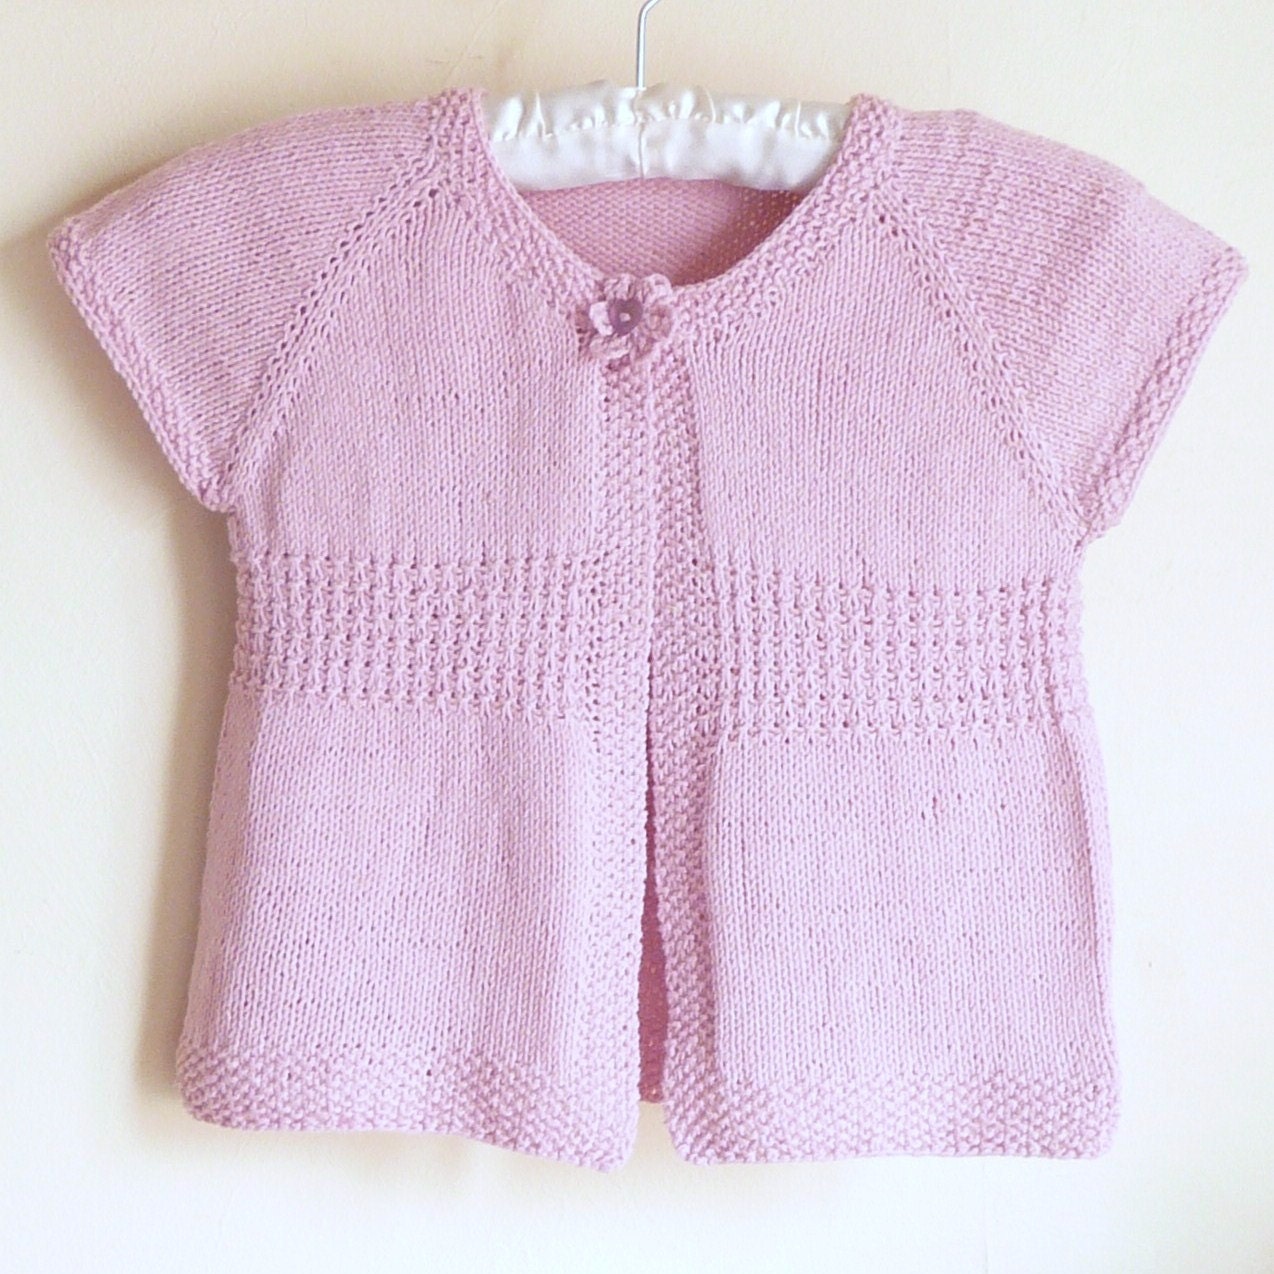 Knitting PATTERN Seamless Top Down Baby Girl CARDIGAN by ...